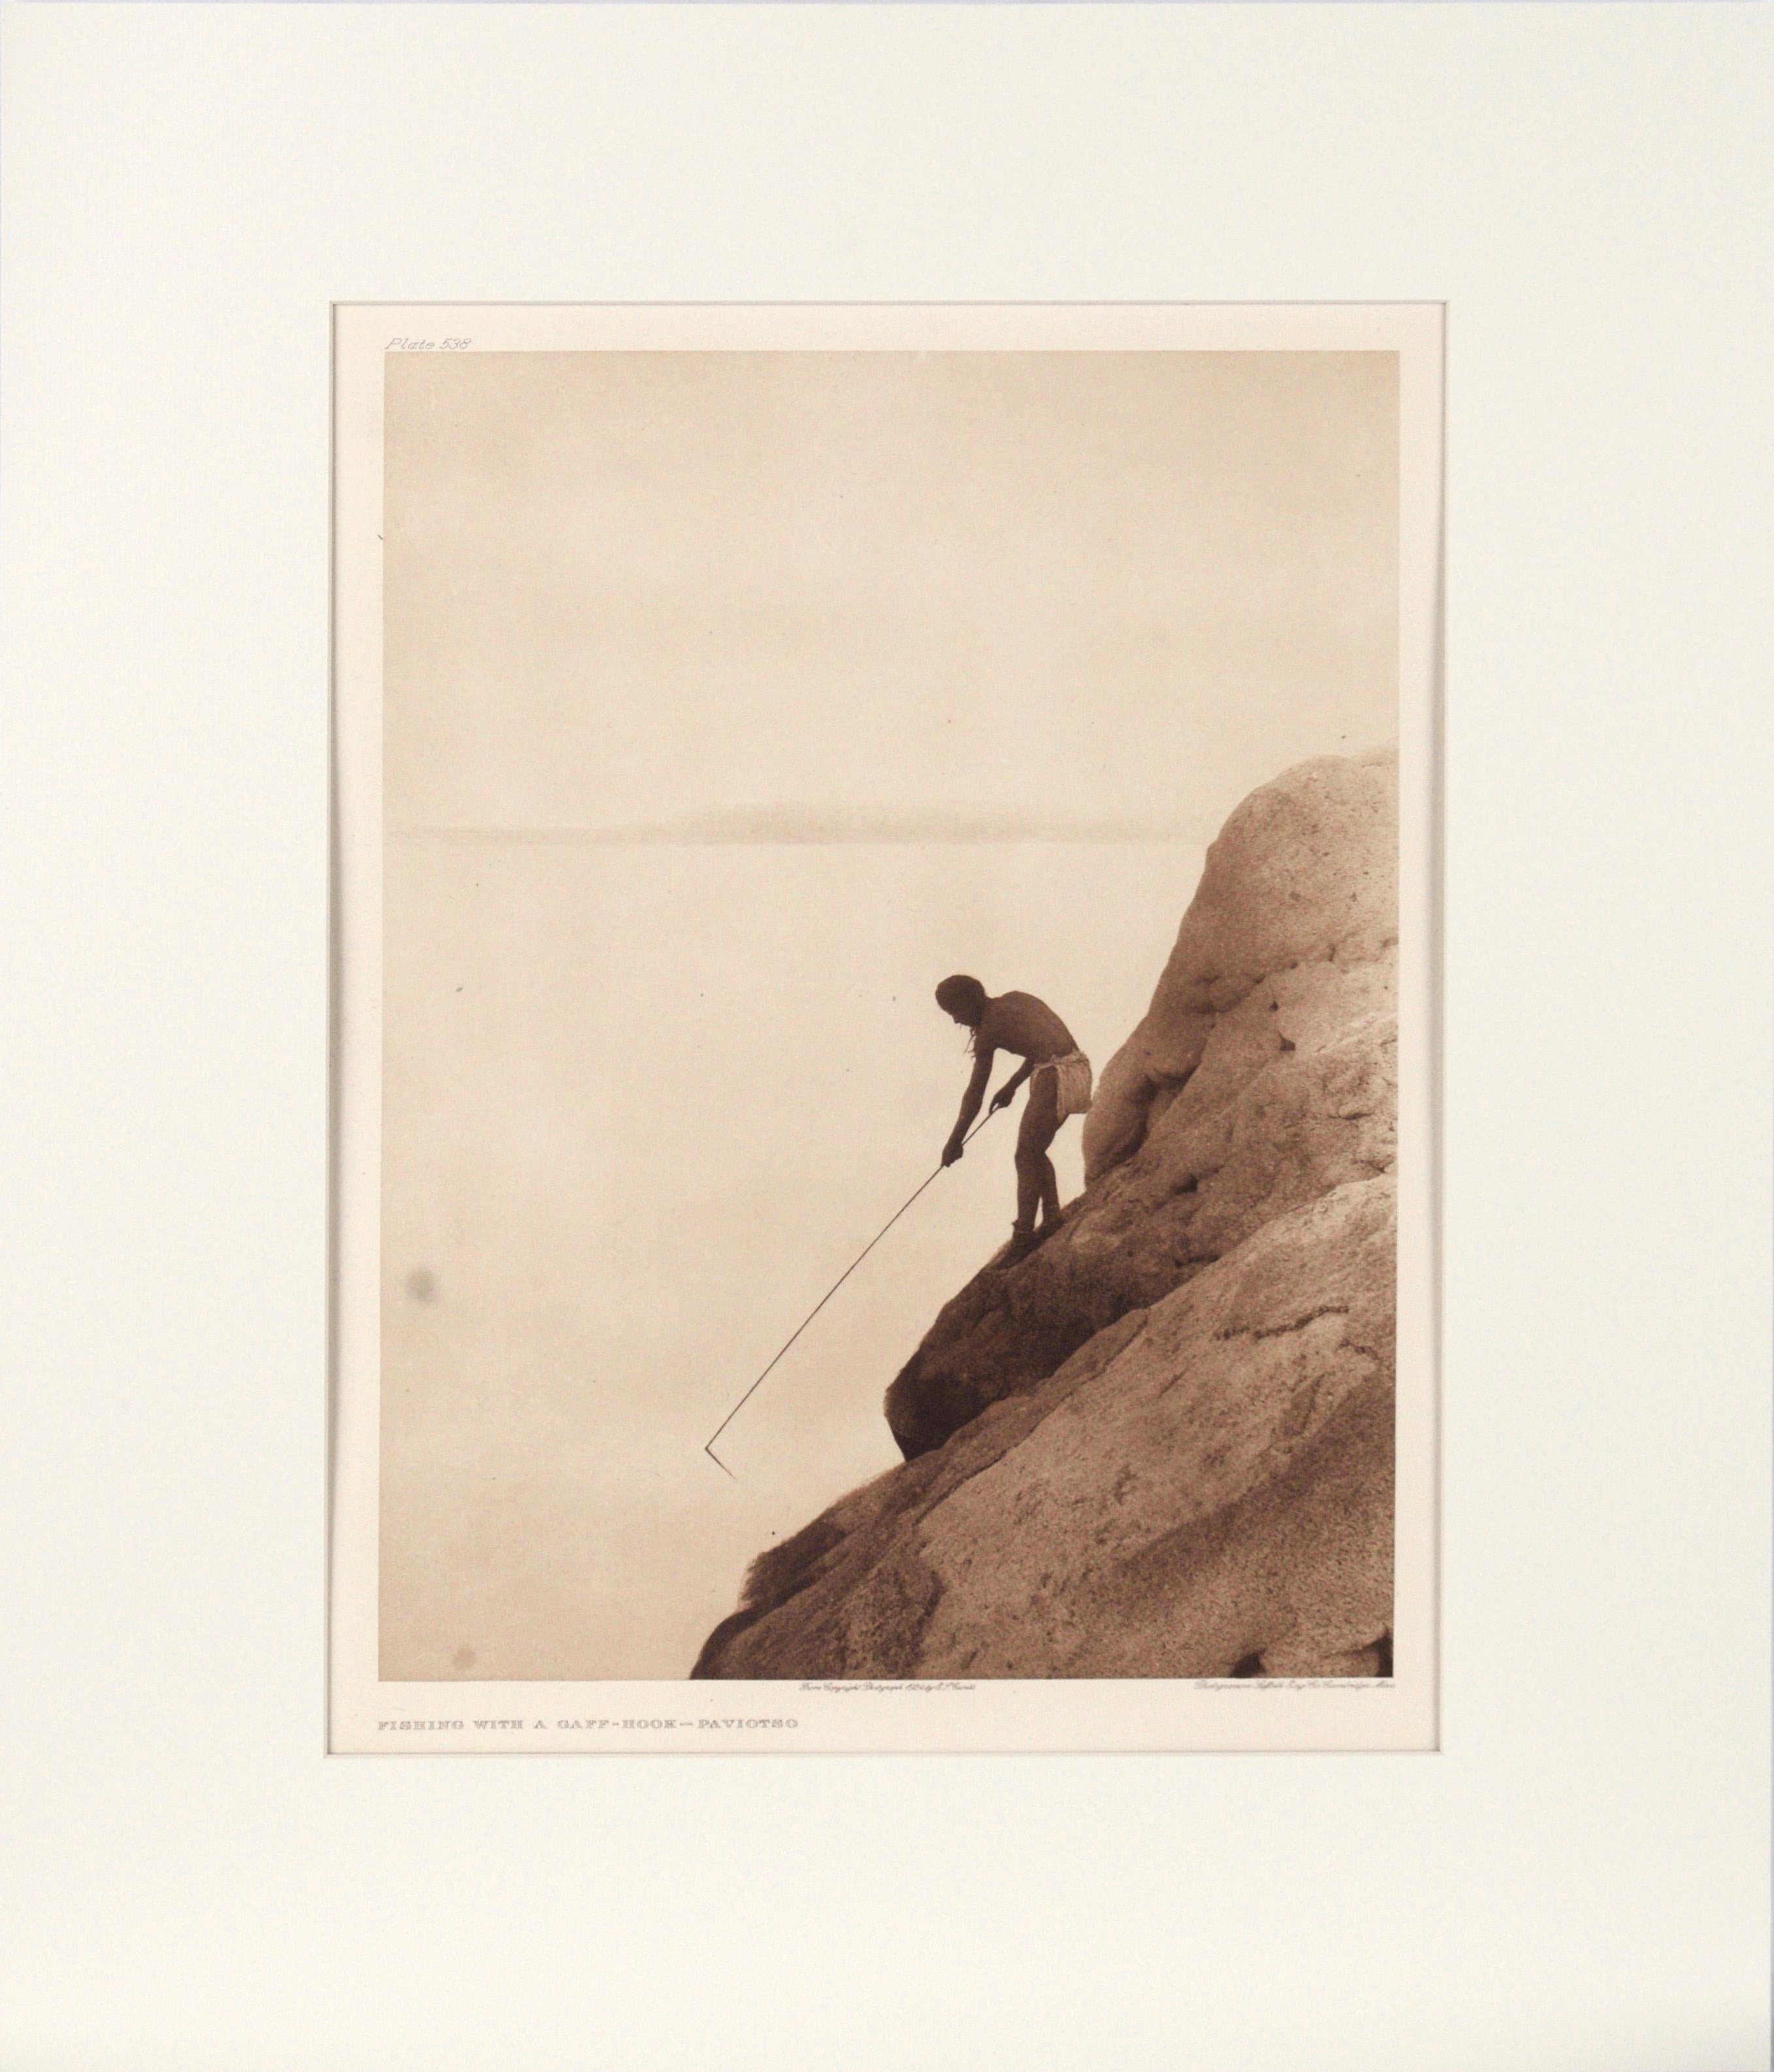 Edward Curtis Landscape Print - "Fishing with a Gaff Hook - Paviotso" Photogravure of a Native American Man